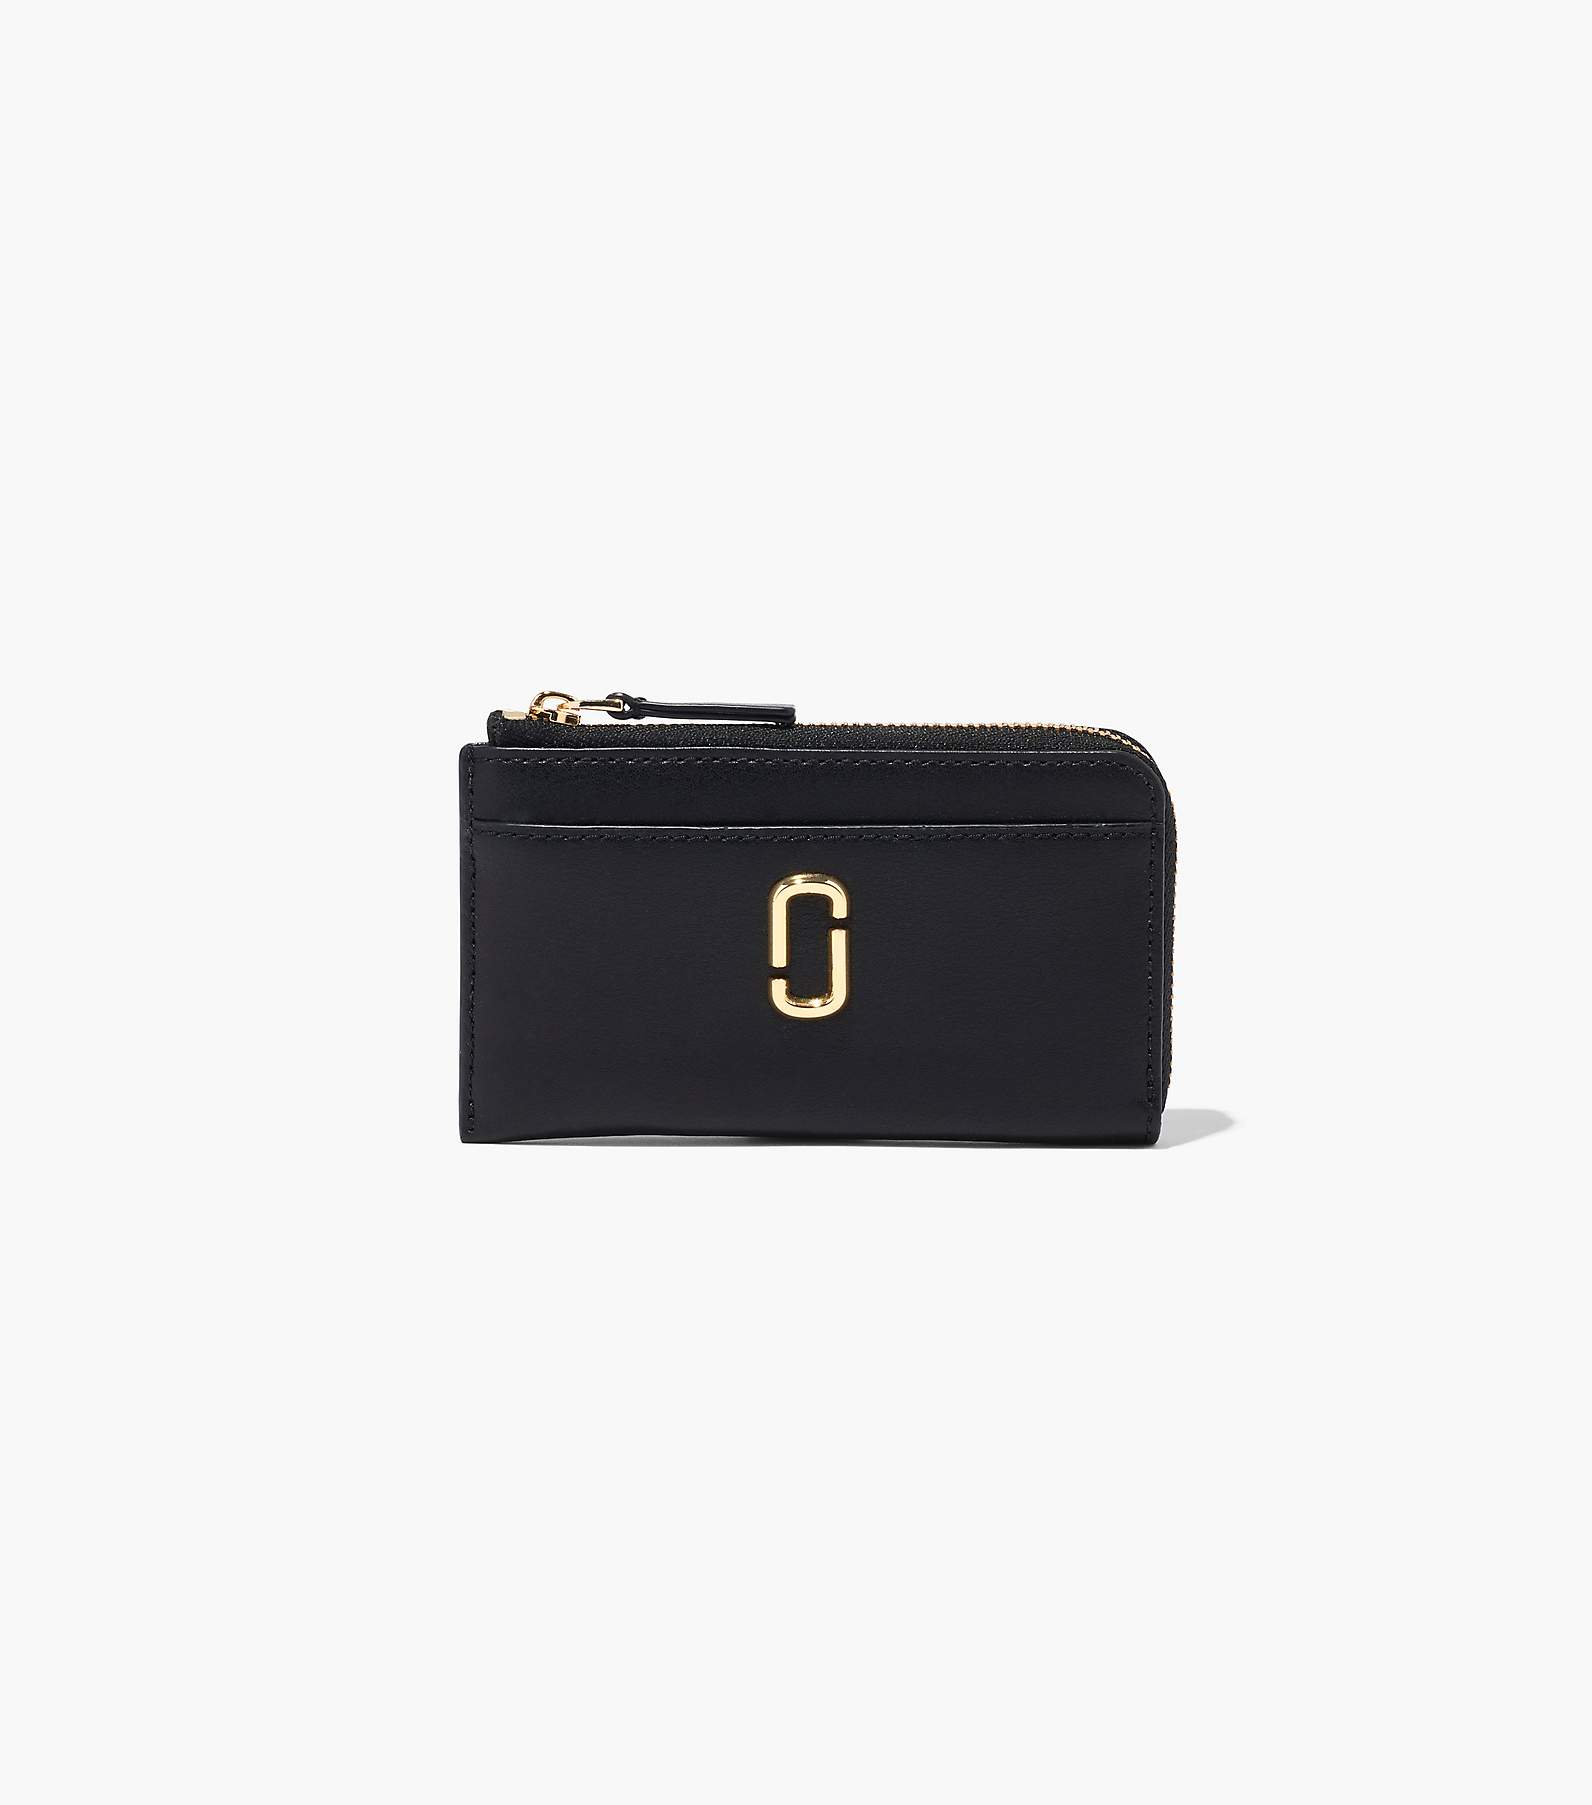 Snapshot DTM of Marc Jacobs - Leather rectangular white, red and